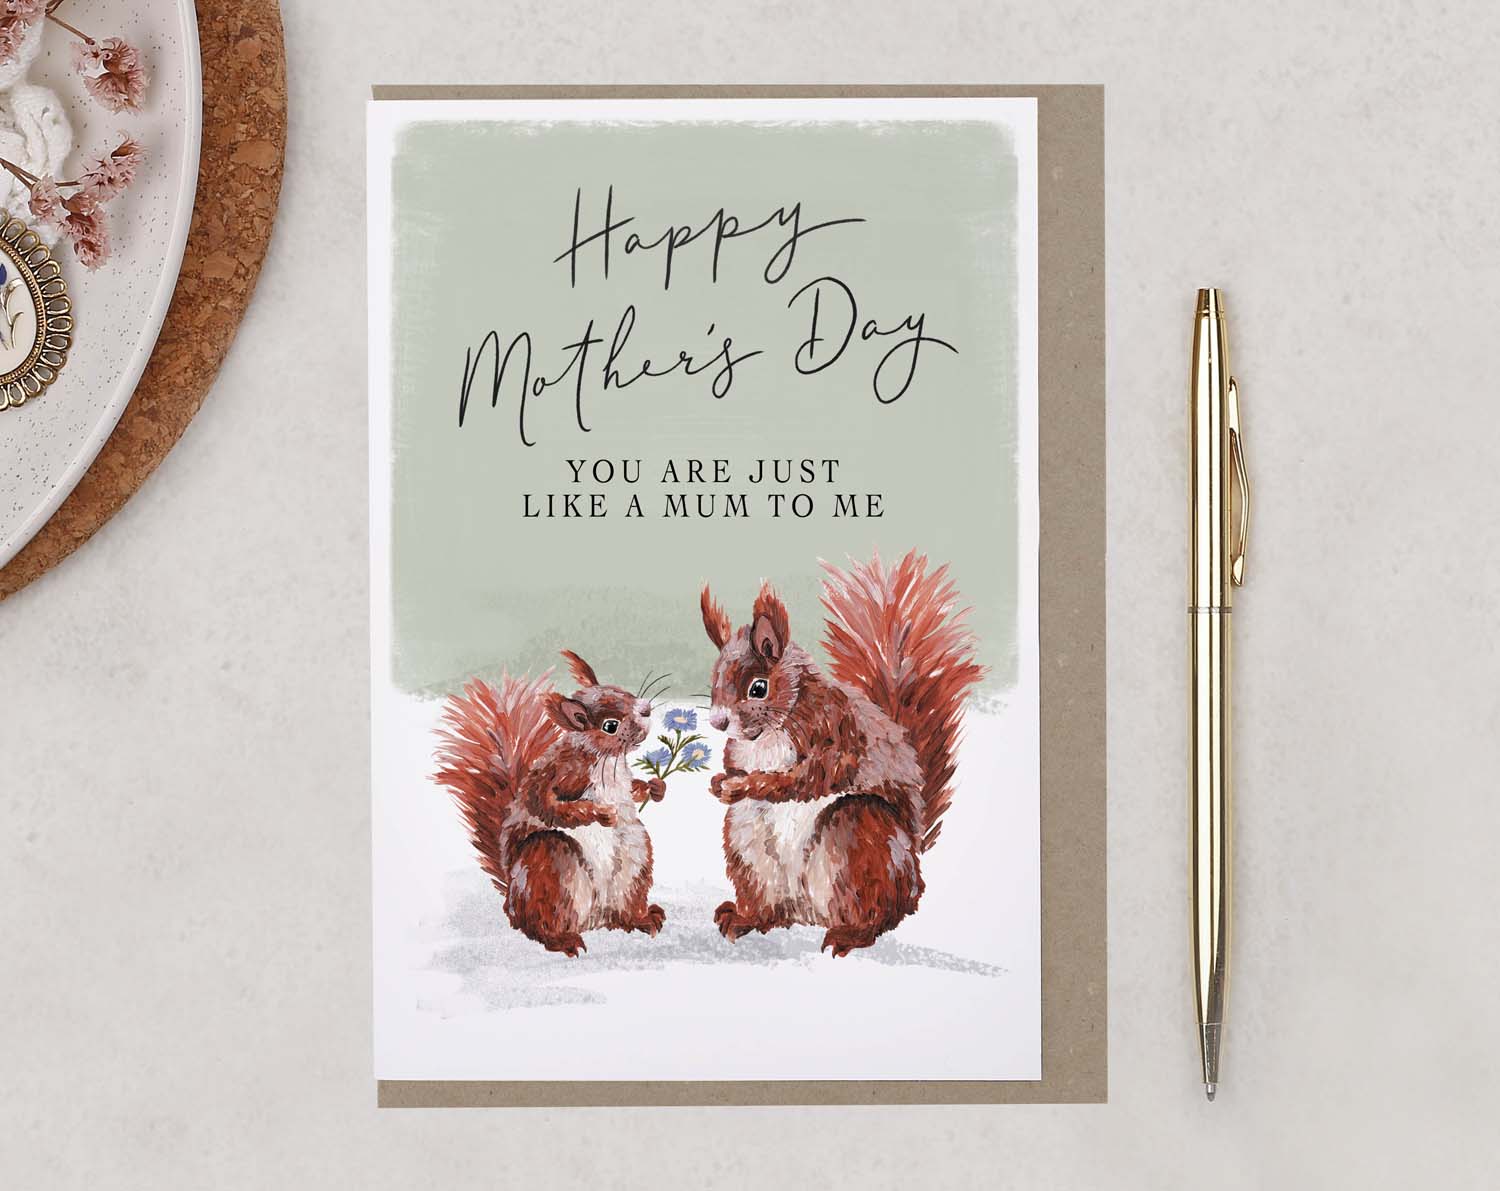 A sentimental Squirrel 'Like A Mum' Happy Mother's Day Card with a pair of adorable red squirrels